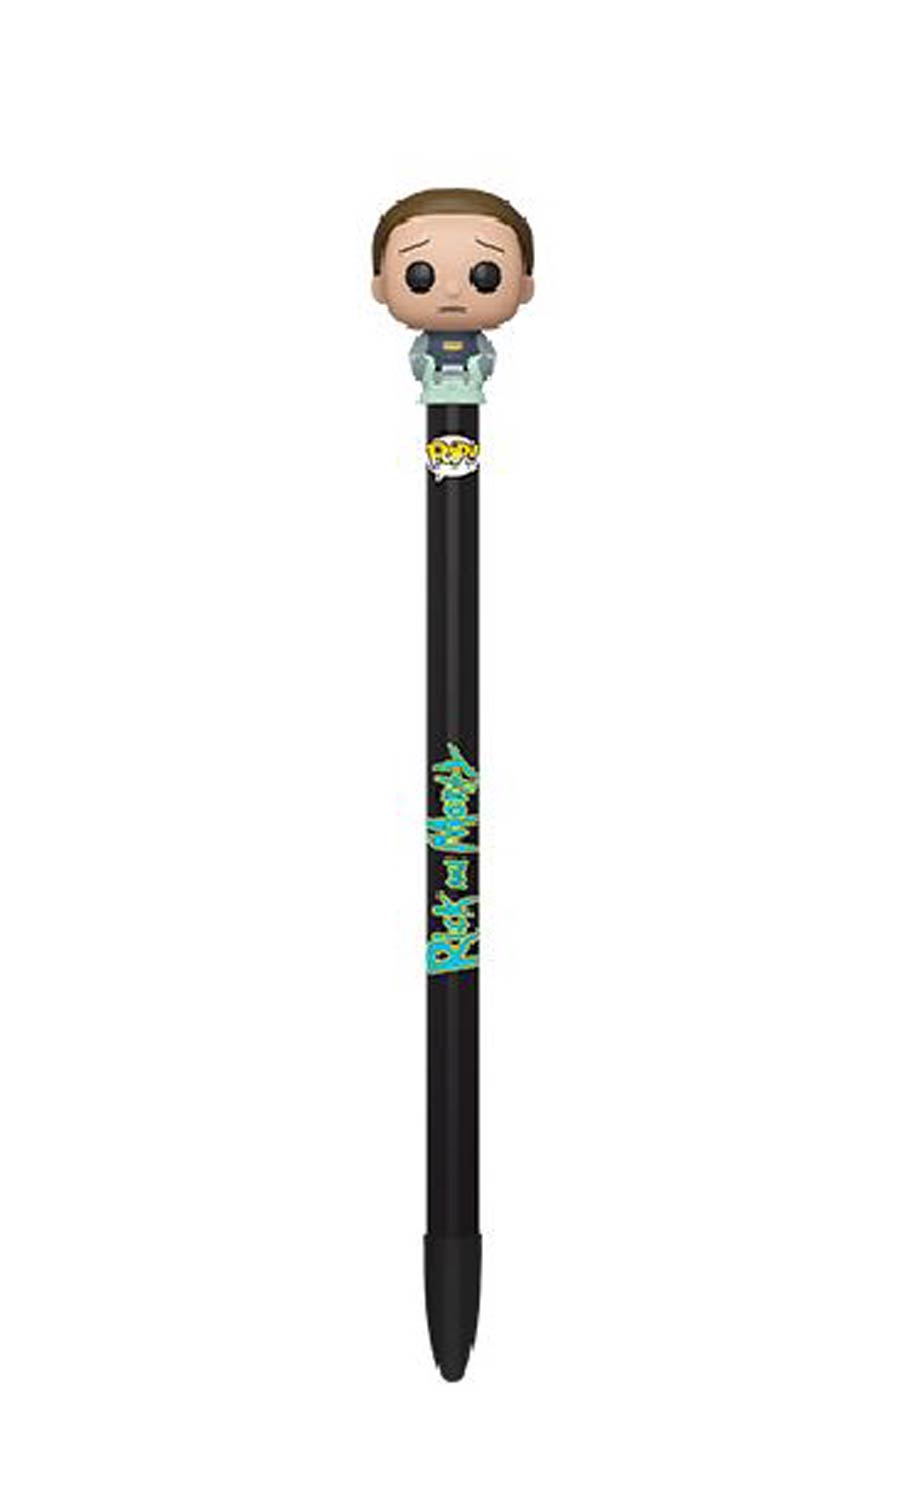 POP Rick And Morty Pen Topper Series 3 - Space Suit Morty